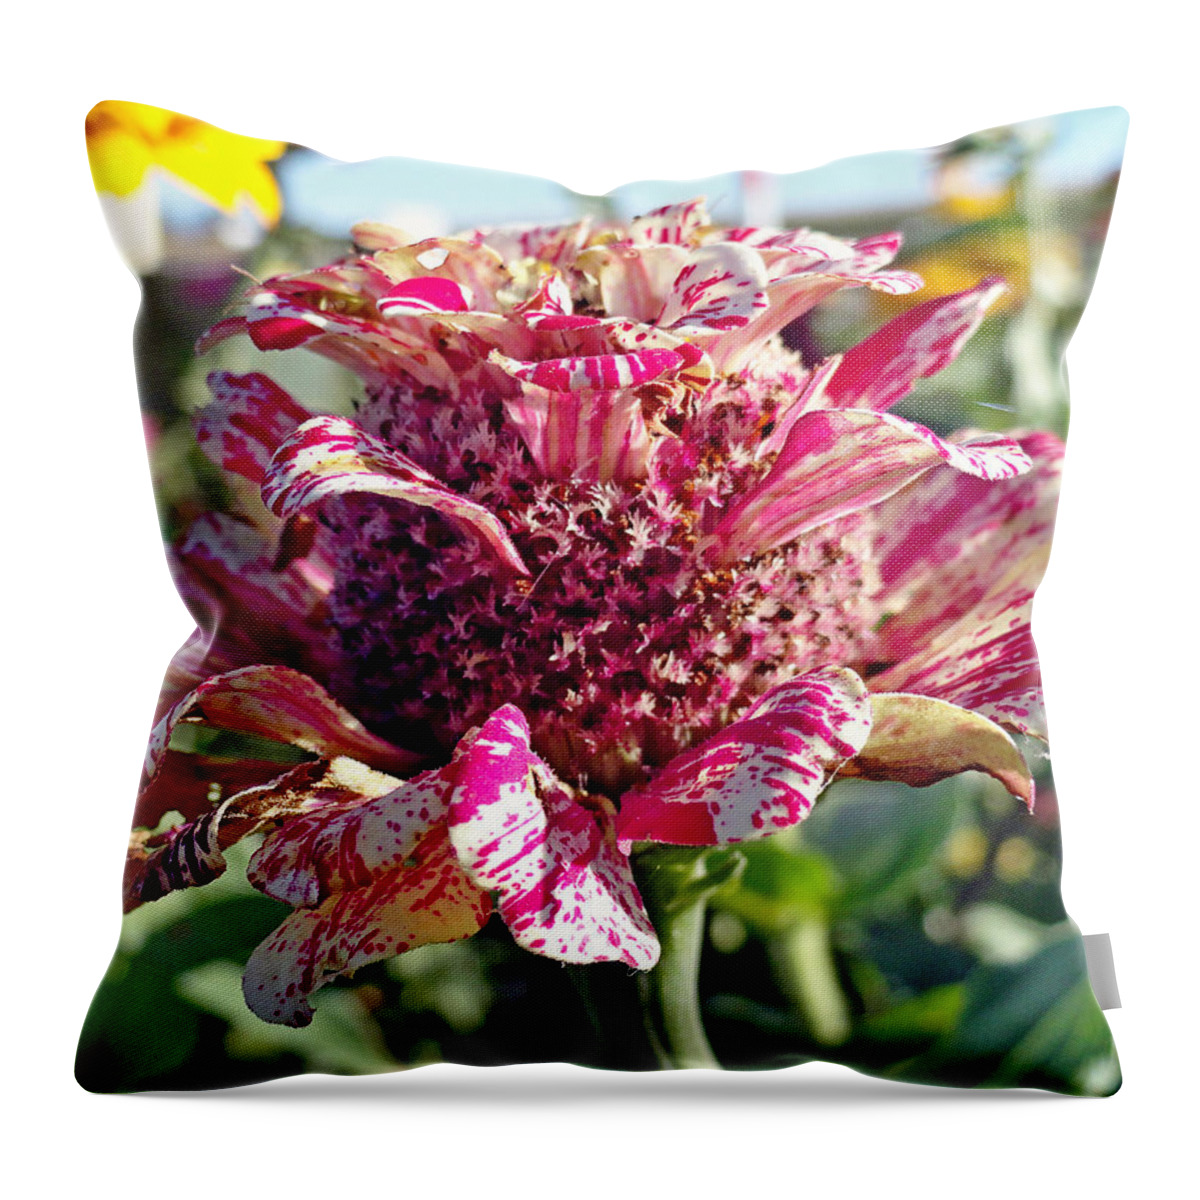 Mottled Pink Throw Pillow featuring the photograph Mottled Pink Cone Flower by Robert Meyers-Lussier